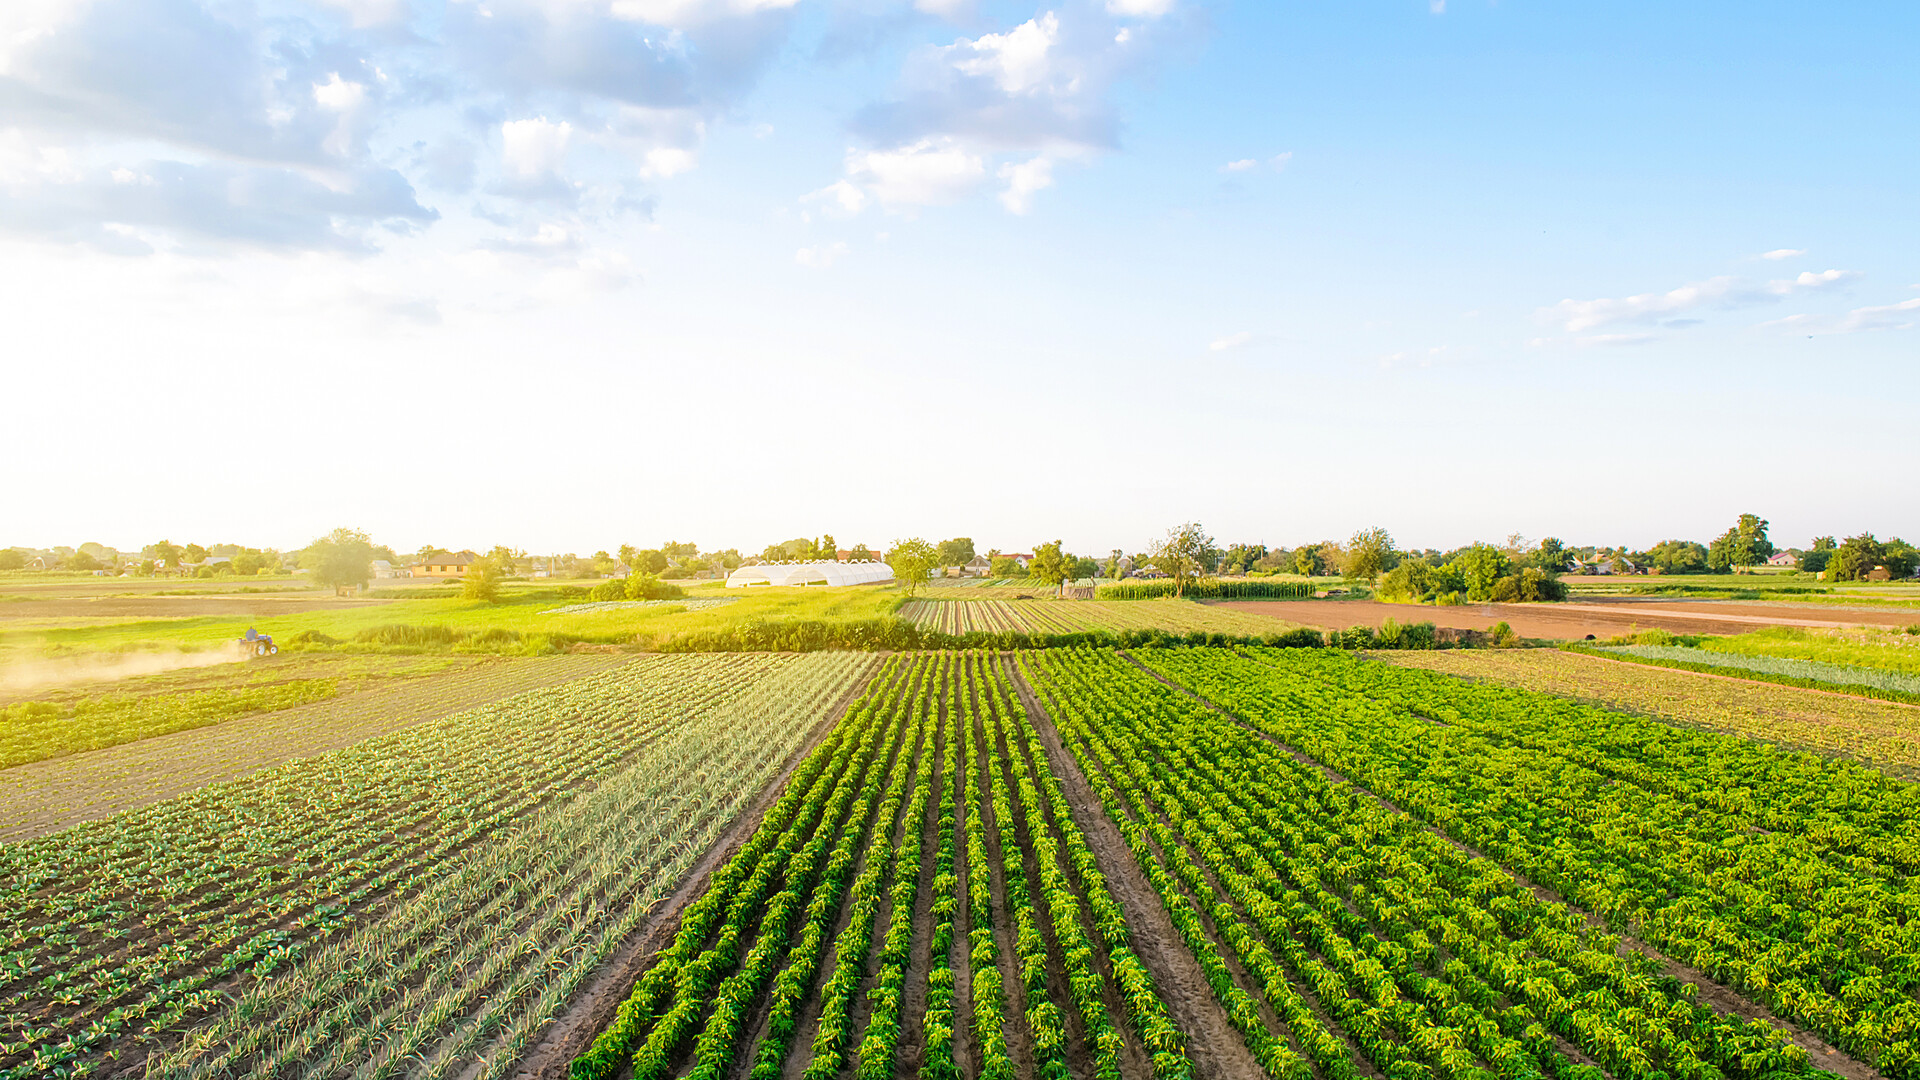 Farmland Value Development in the USA – AG INFORMATION NETWORK OF THE WEST